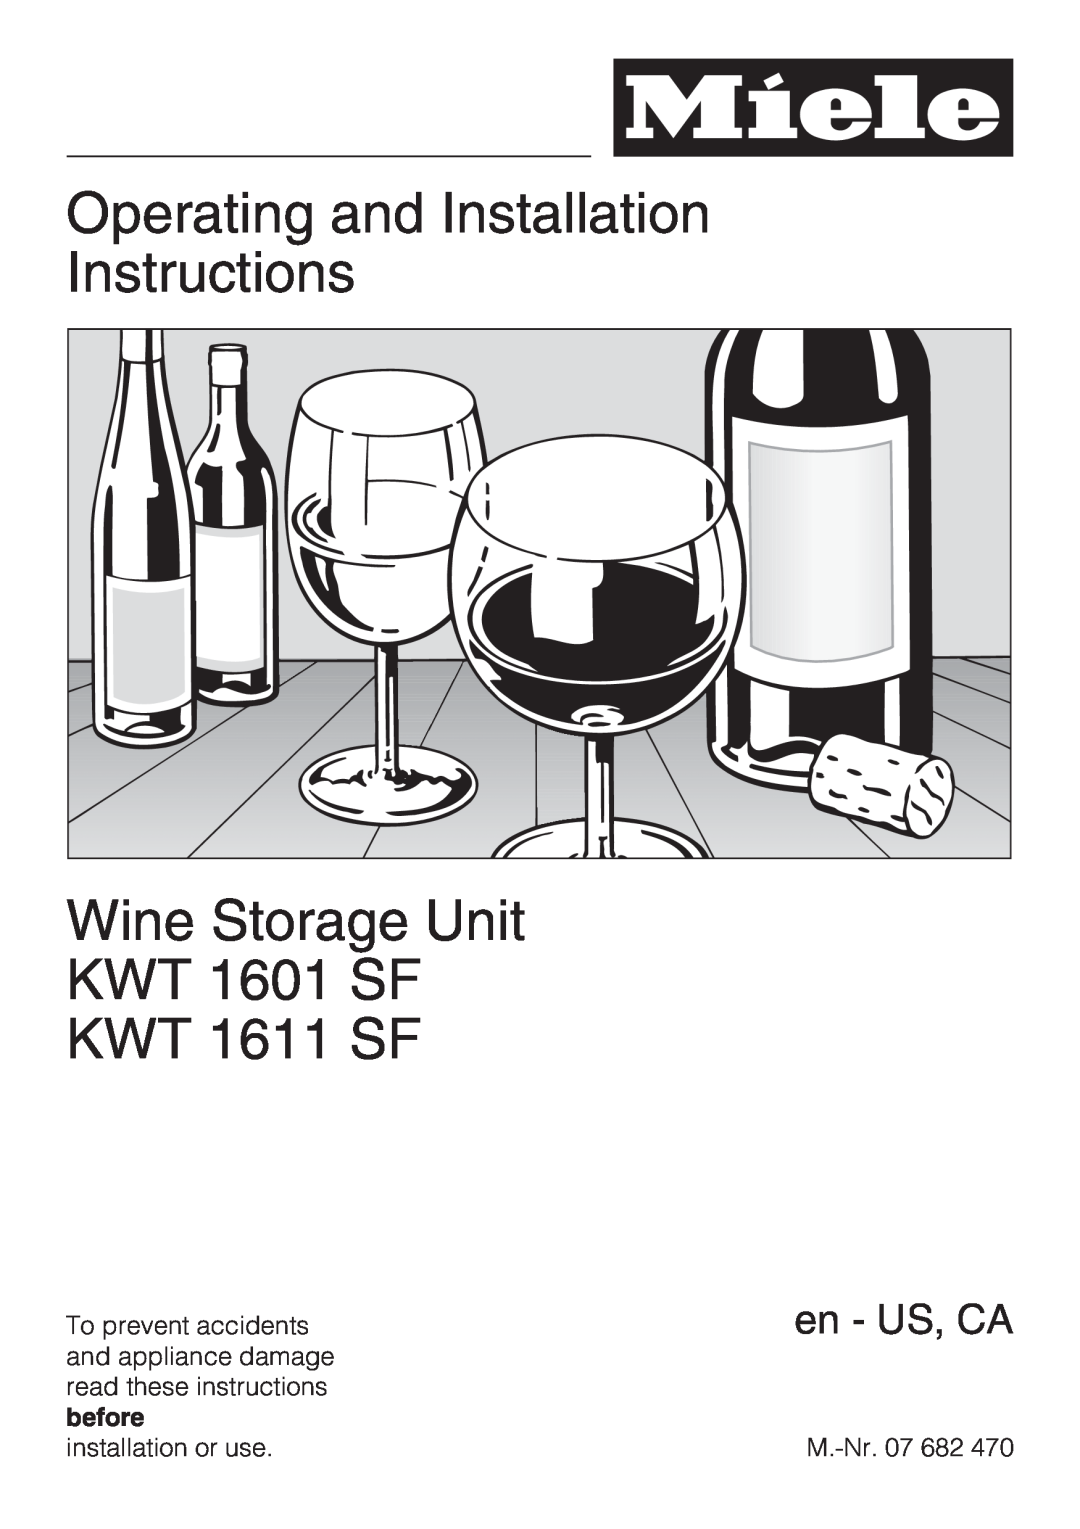 Miele KWT1601SF, KWT1611SF installation instructions Operating and Installation Instructions, en - US, CA 